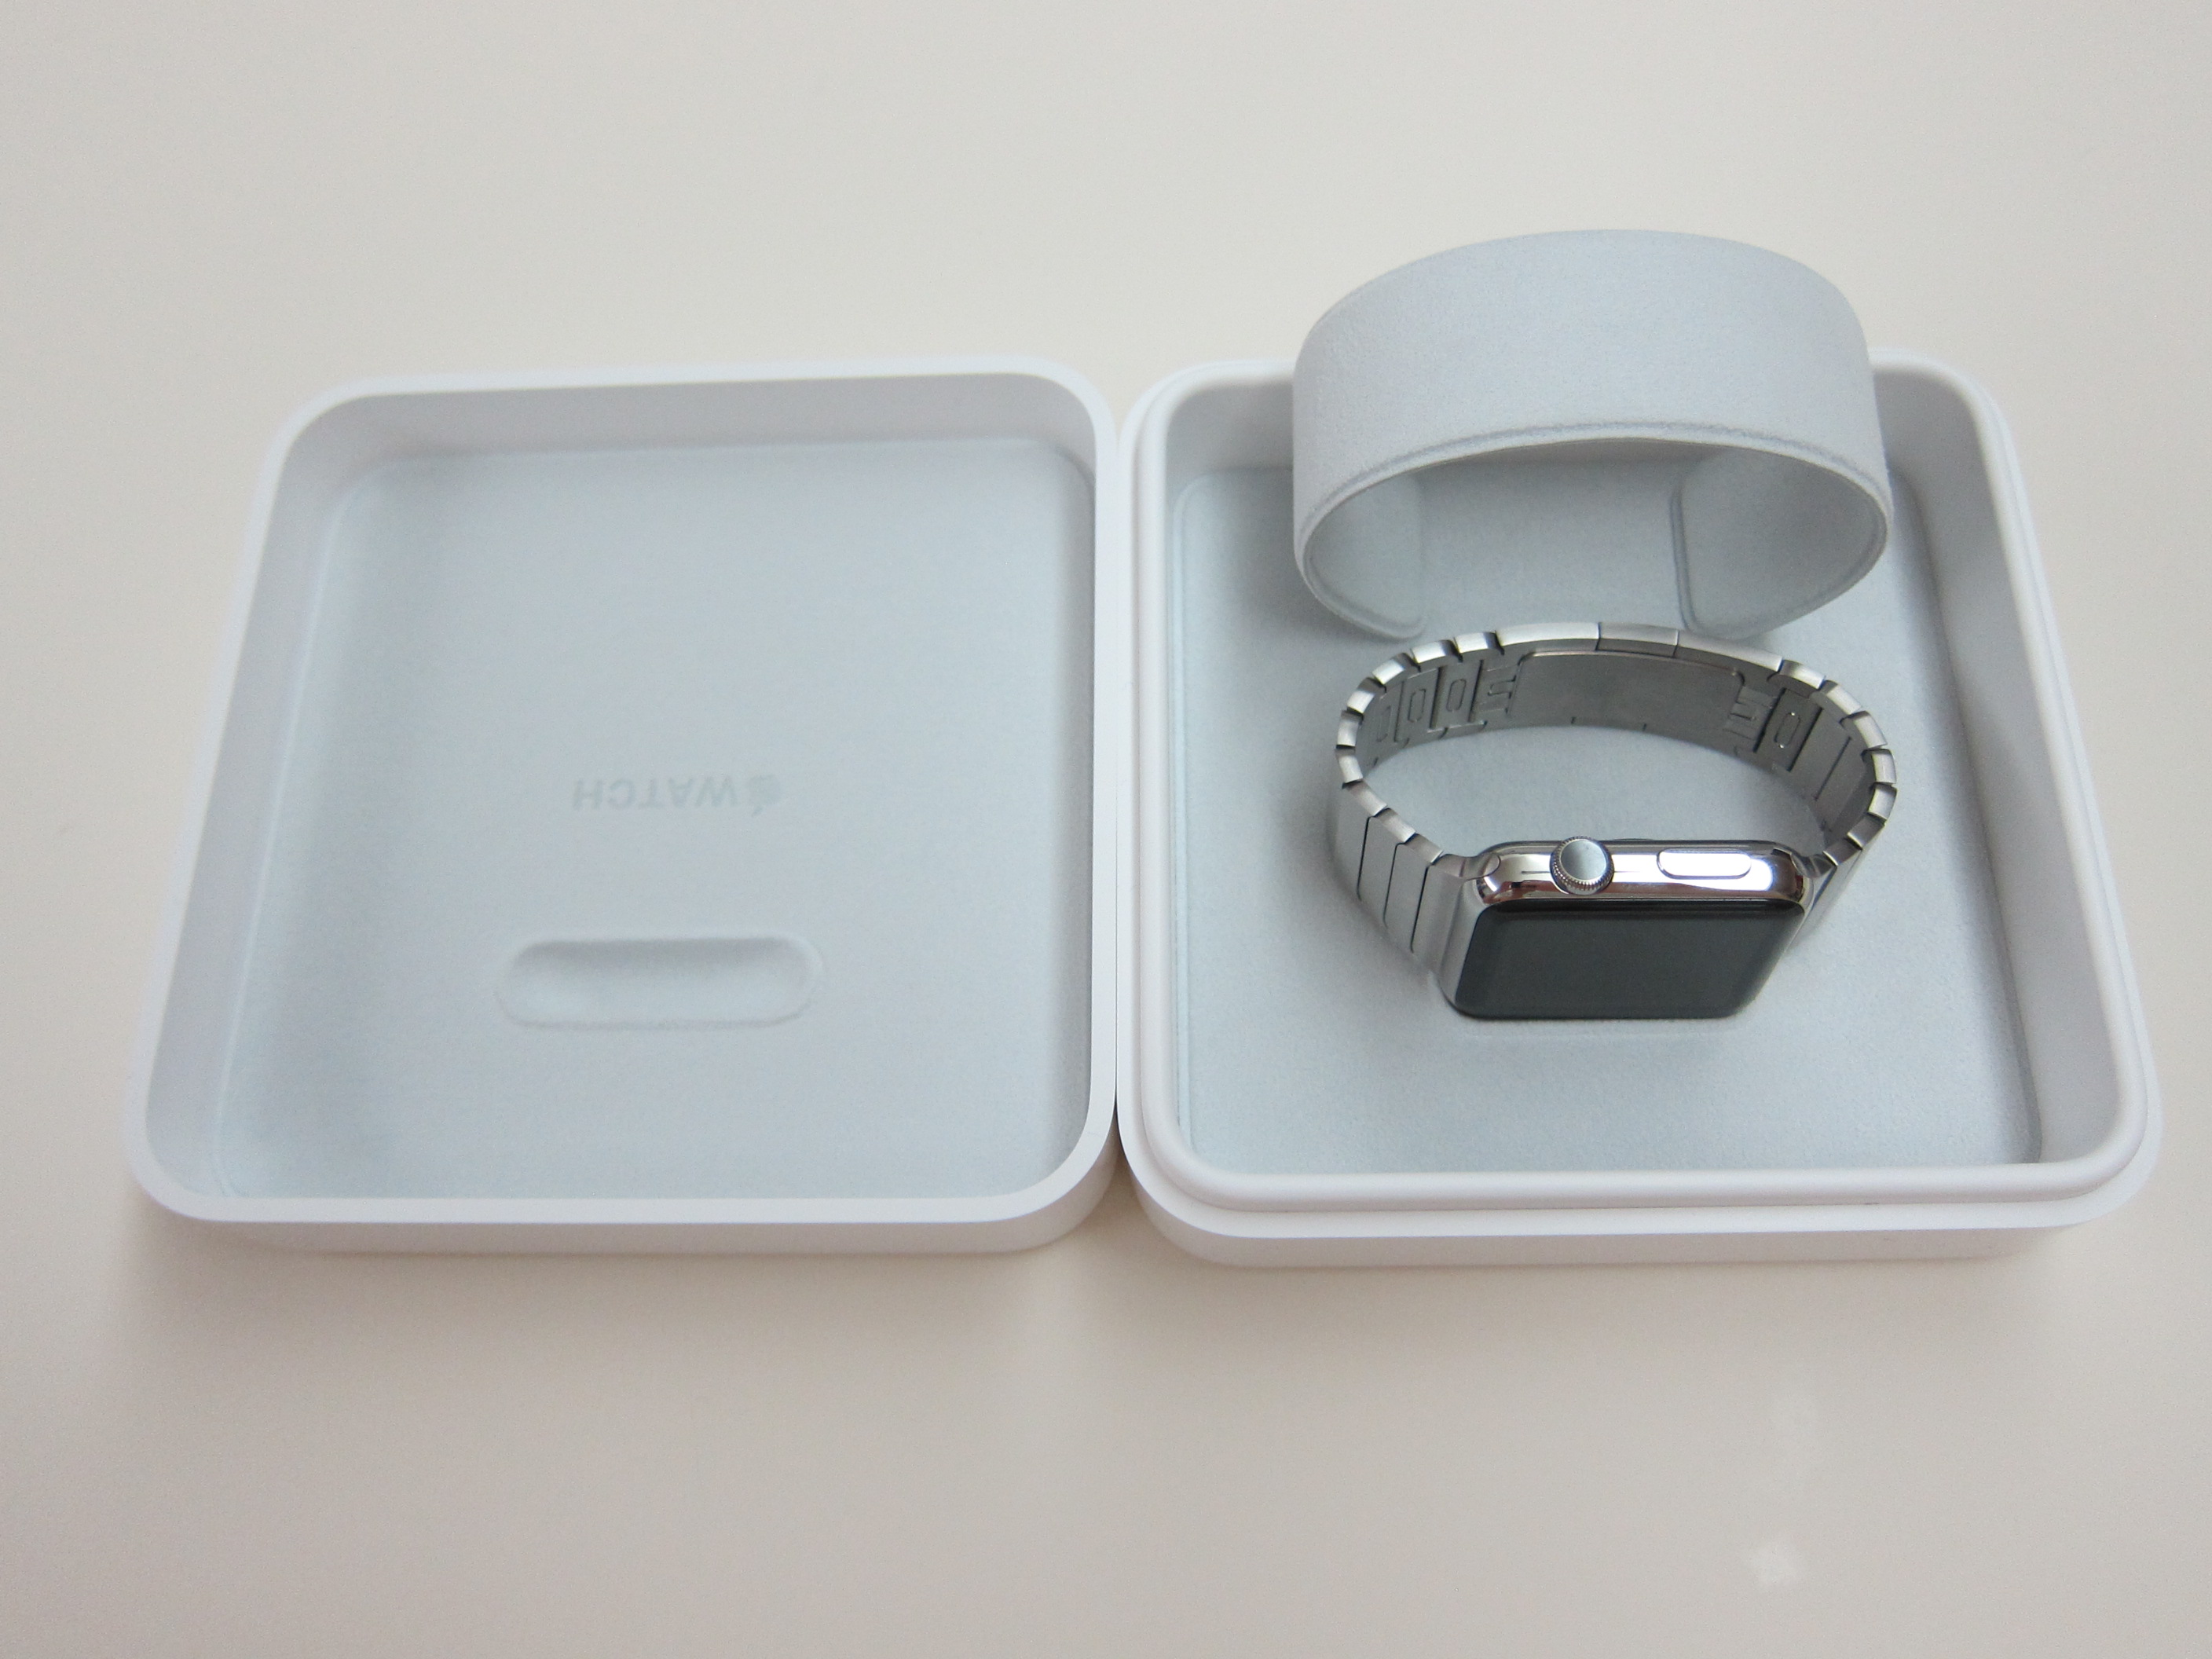 Apple Watch 42mm Stainless Steel Case With Link Bracelet « Blog